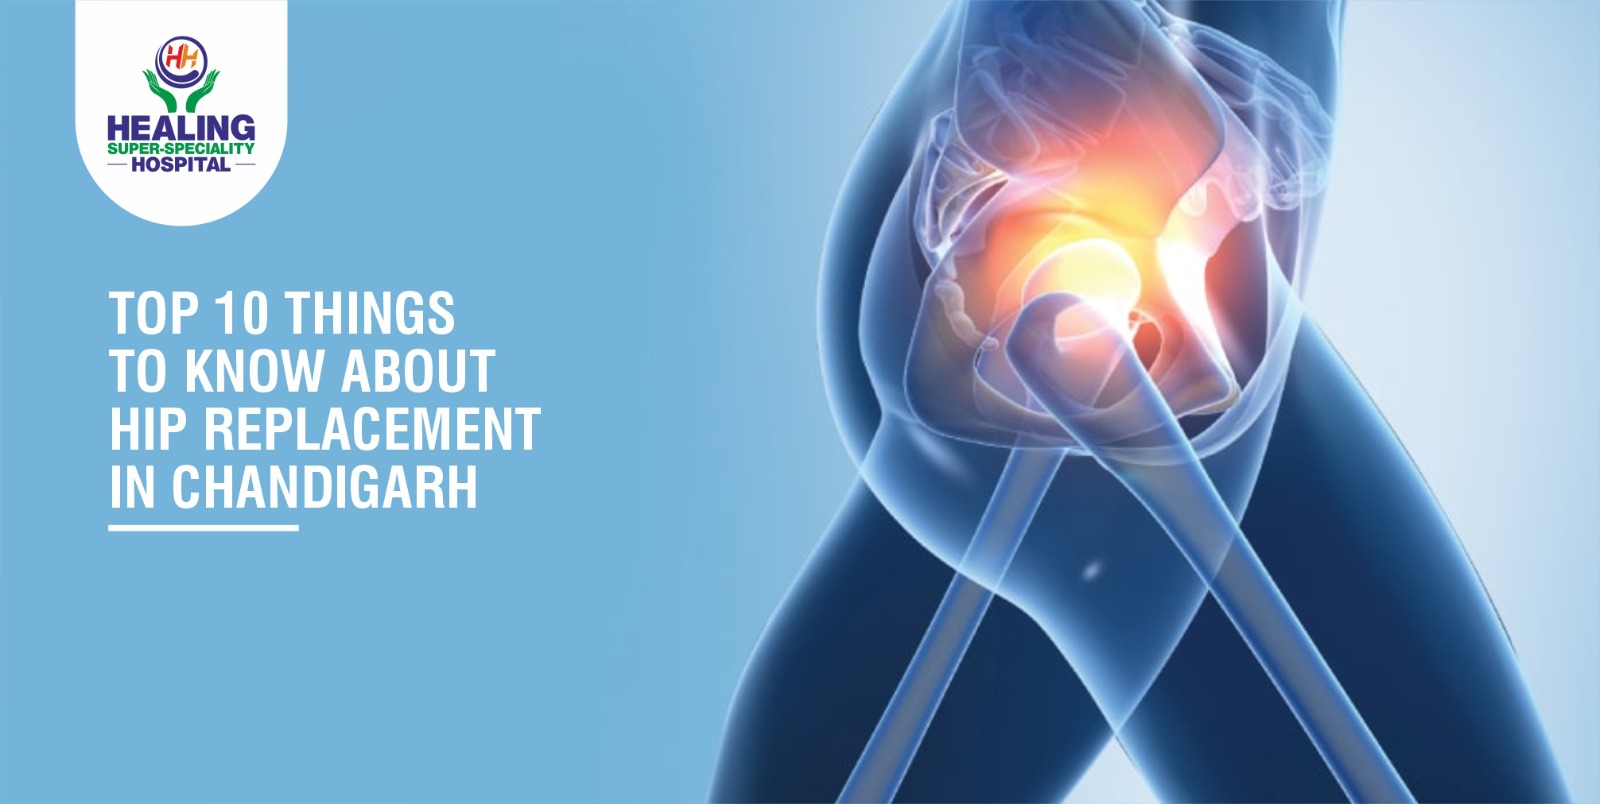 Top 10 Things to Know About Hip Replacement in Chandigarh